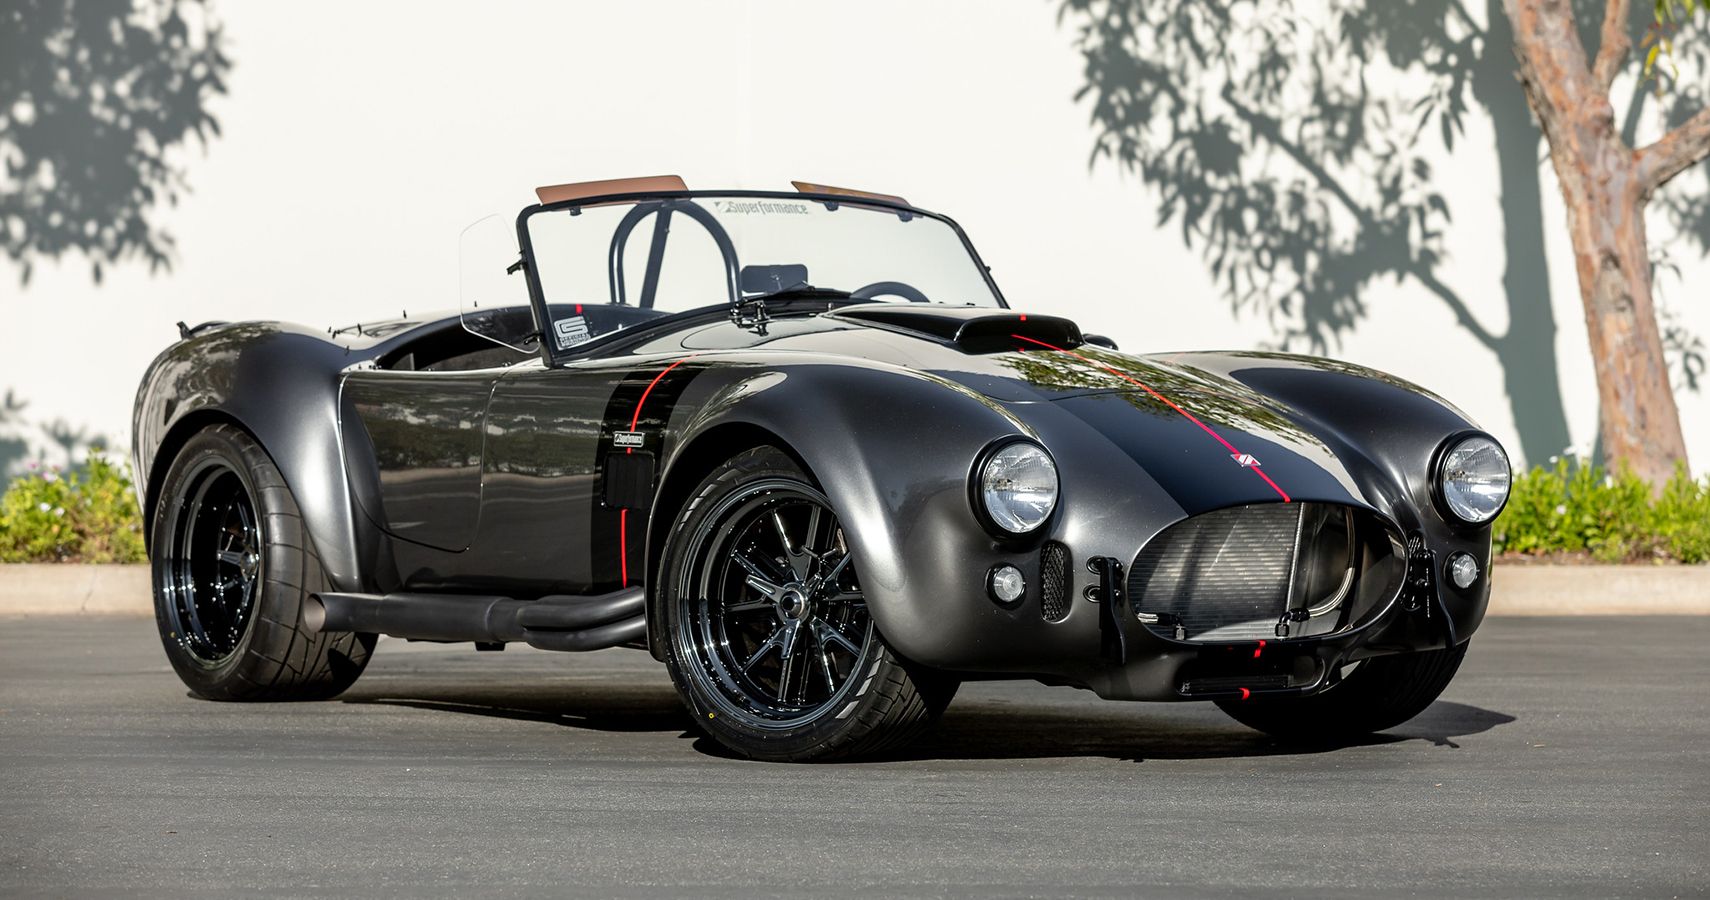 Moneywise, The AC Cobra Electric Is A Supercar